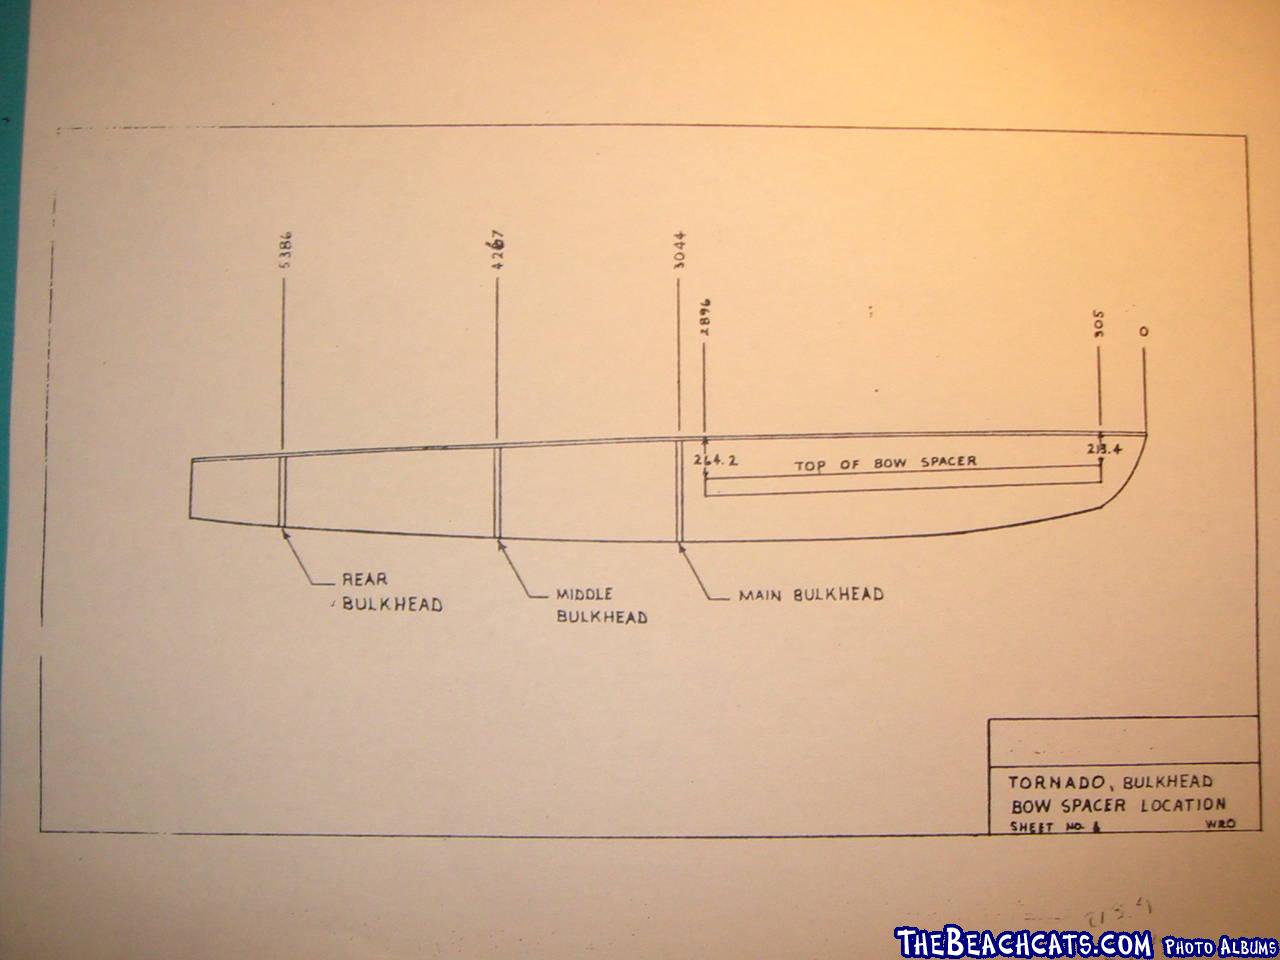 construction-notes-bulkhead-bow-spacer-location